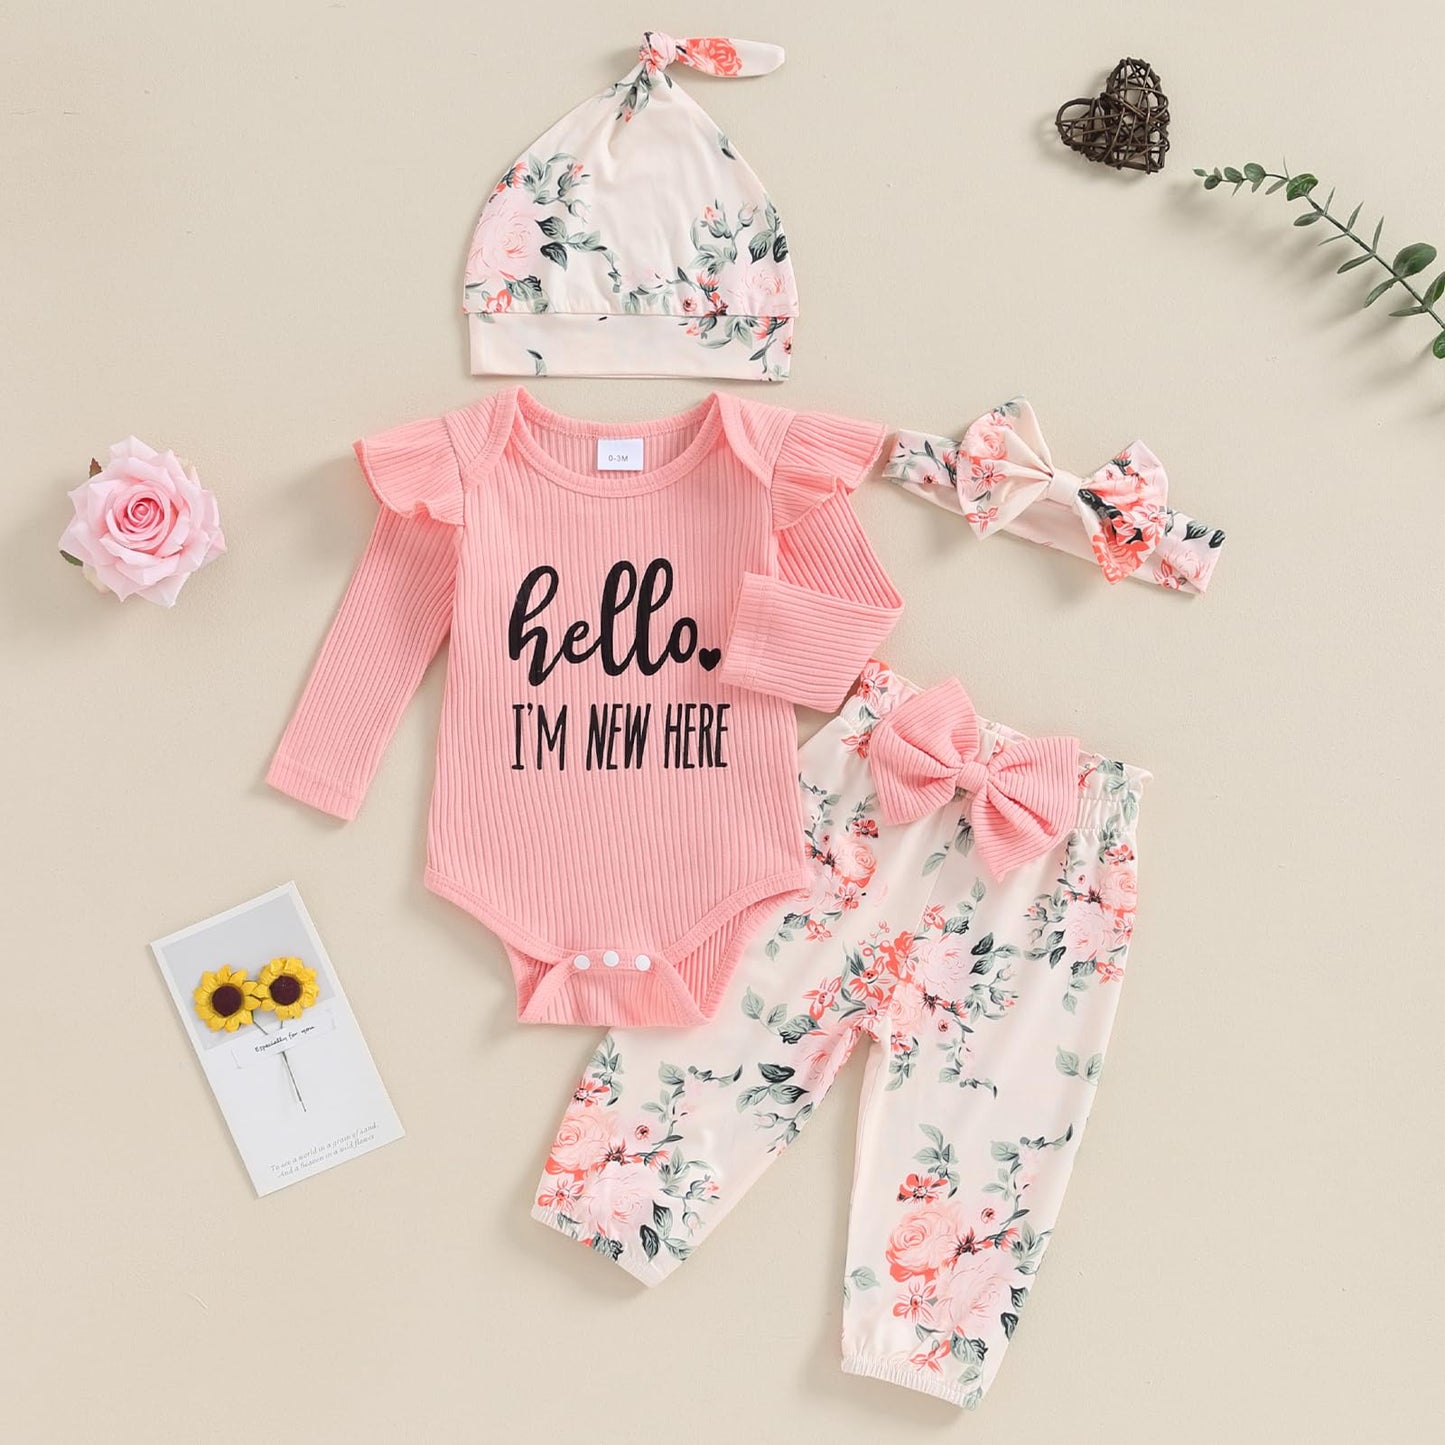 Twopumpkin Newborn Baby Girl Clothes Outfits Rib Knit Onesie Romper Floral Pants Headband Hat Coming Home Outfit (Hello I'm New Here Pink, Newborn)